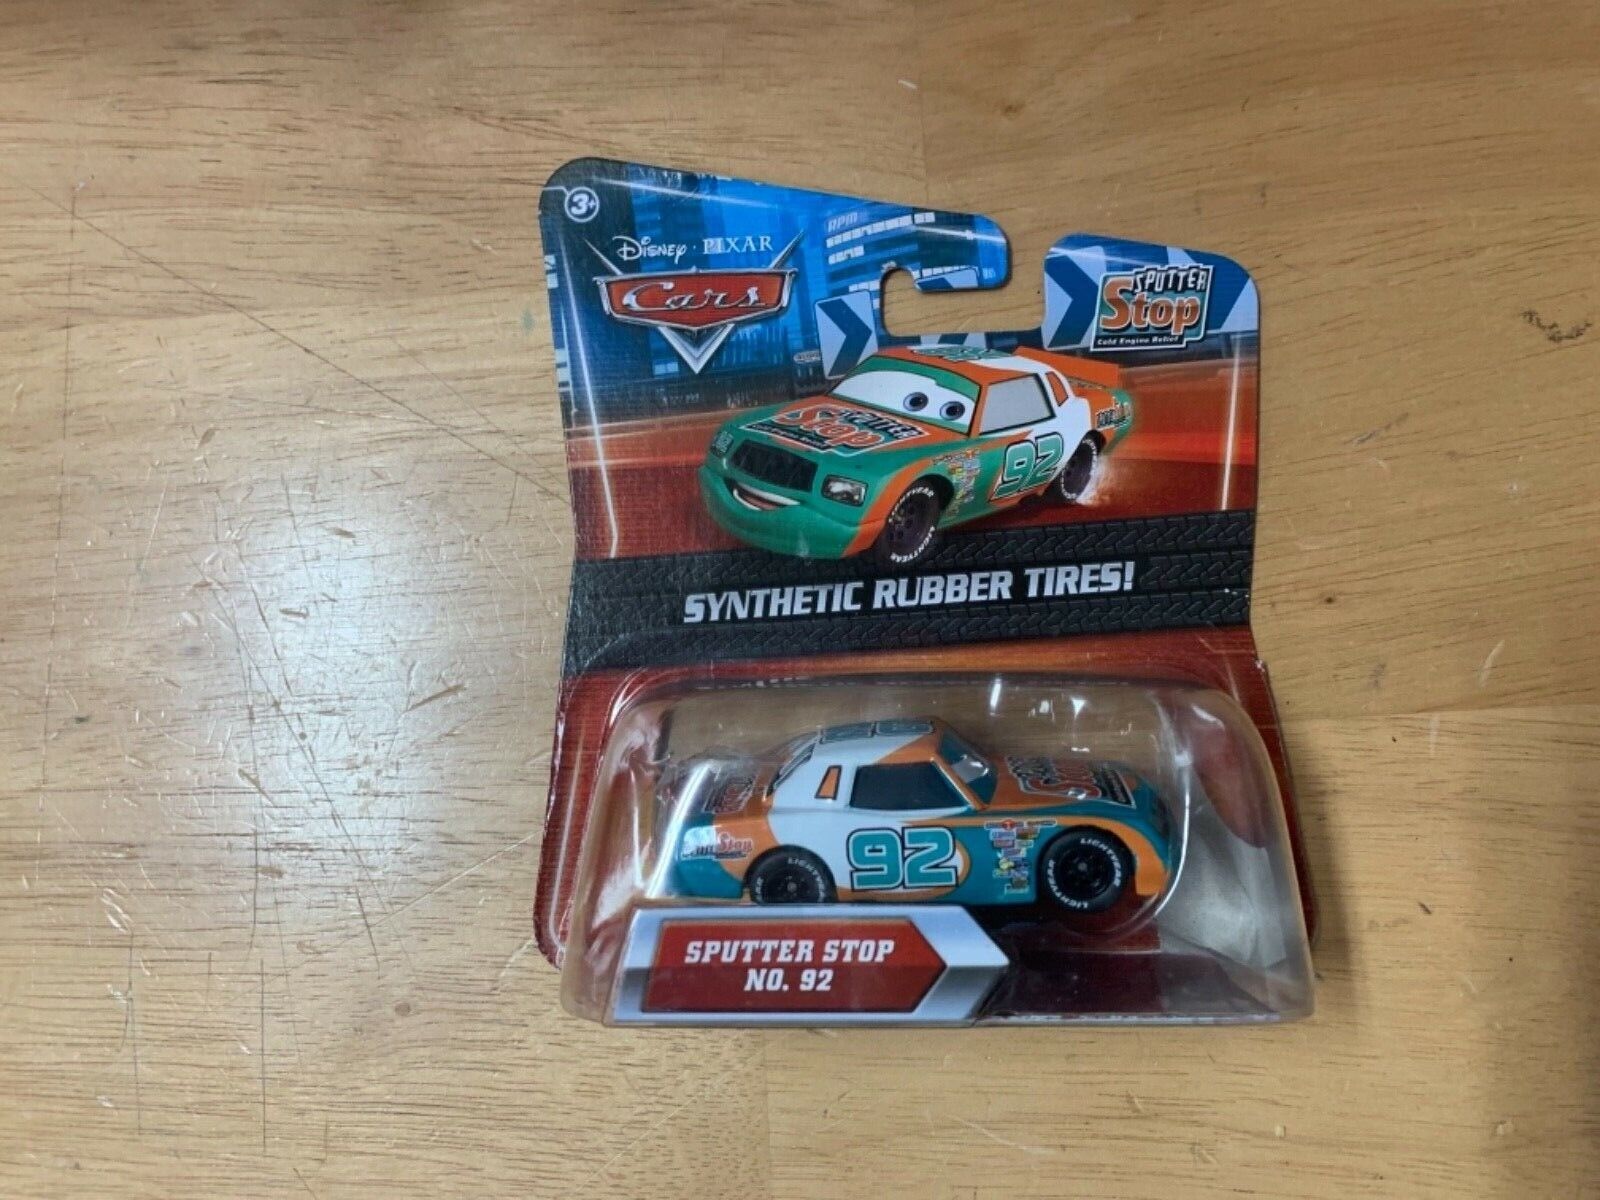 Disney Pixar Cars Synthetic Rubber Tires Opened Sputter Stop No. 92